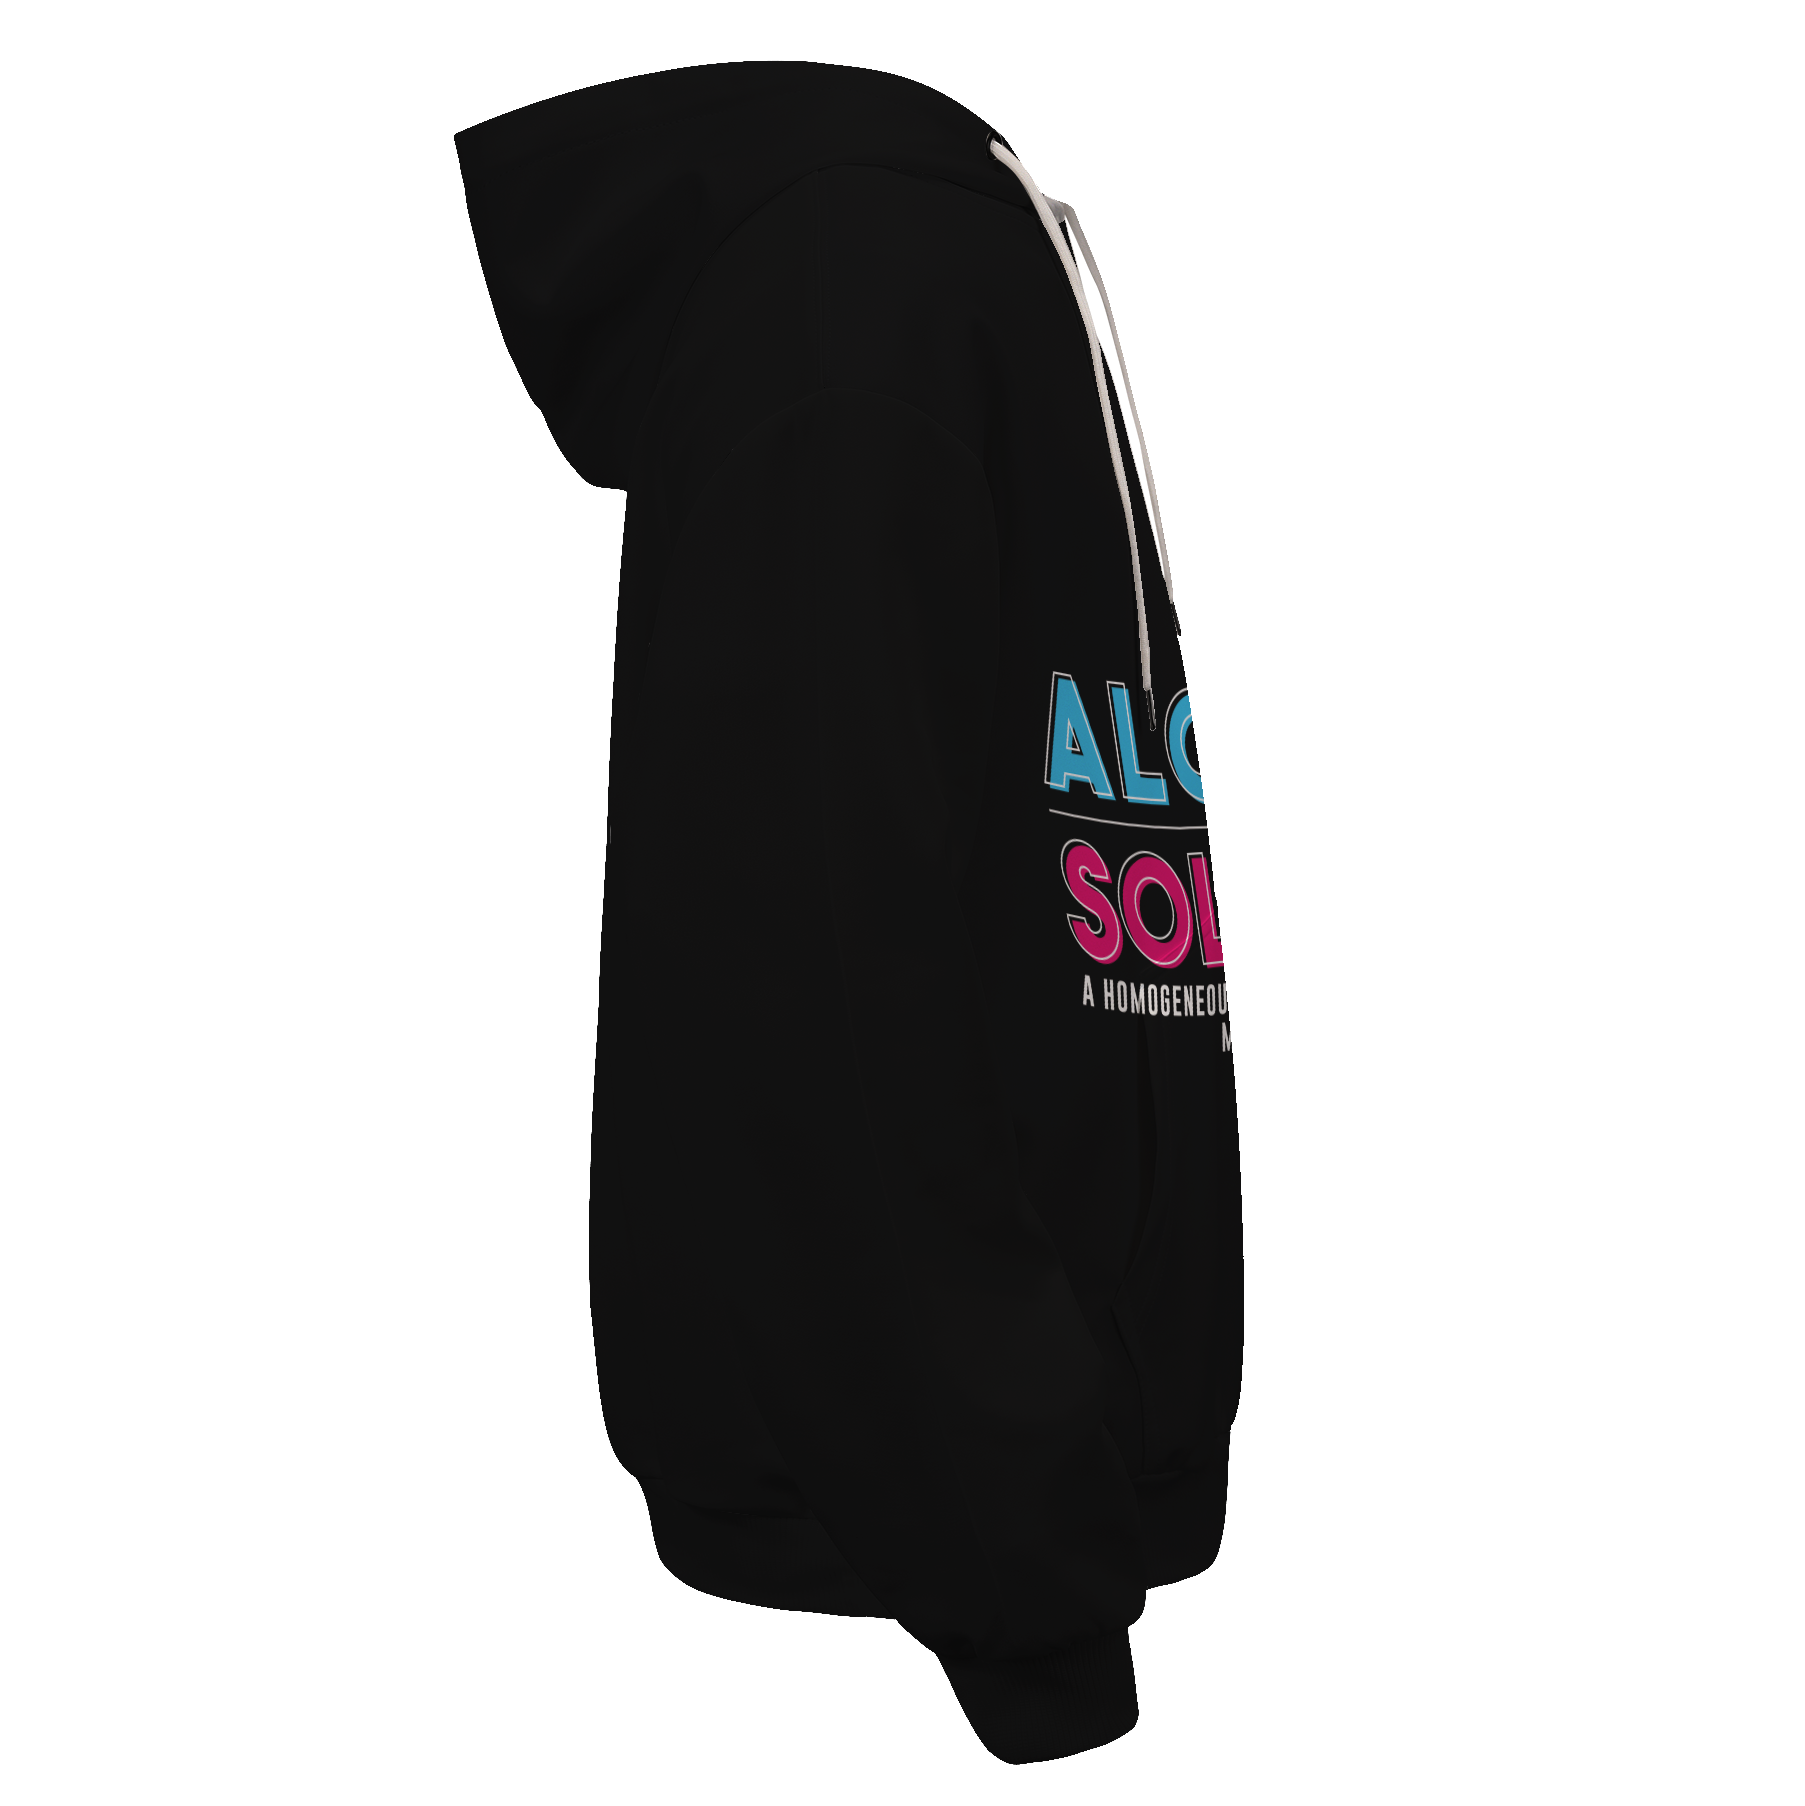 Alcohol is a Solution Unisex Pullover Hoodie